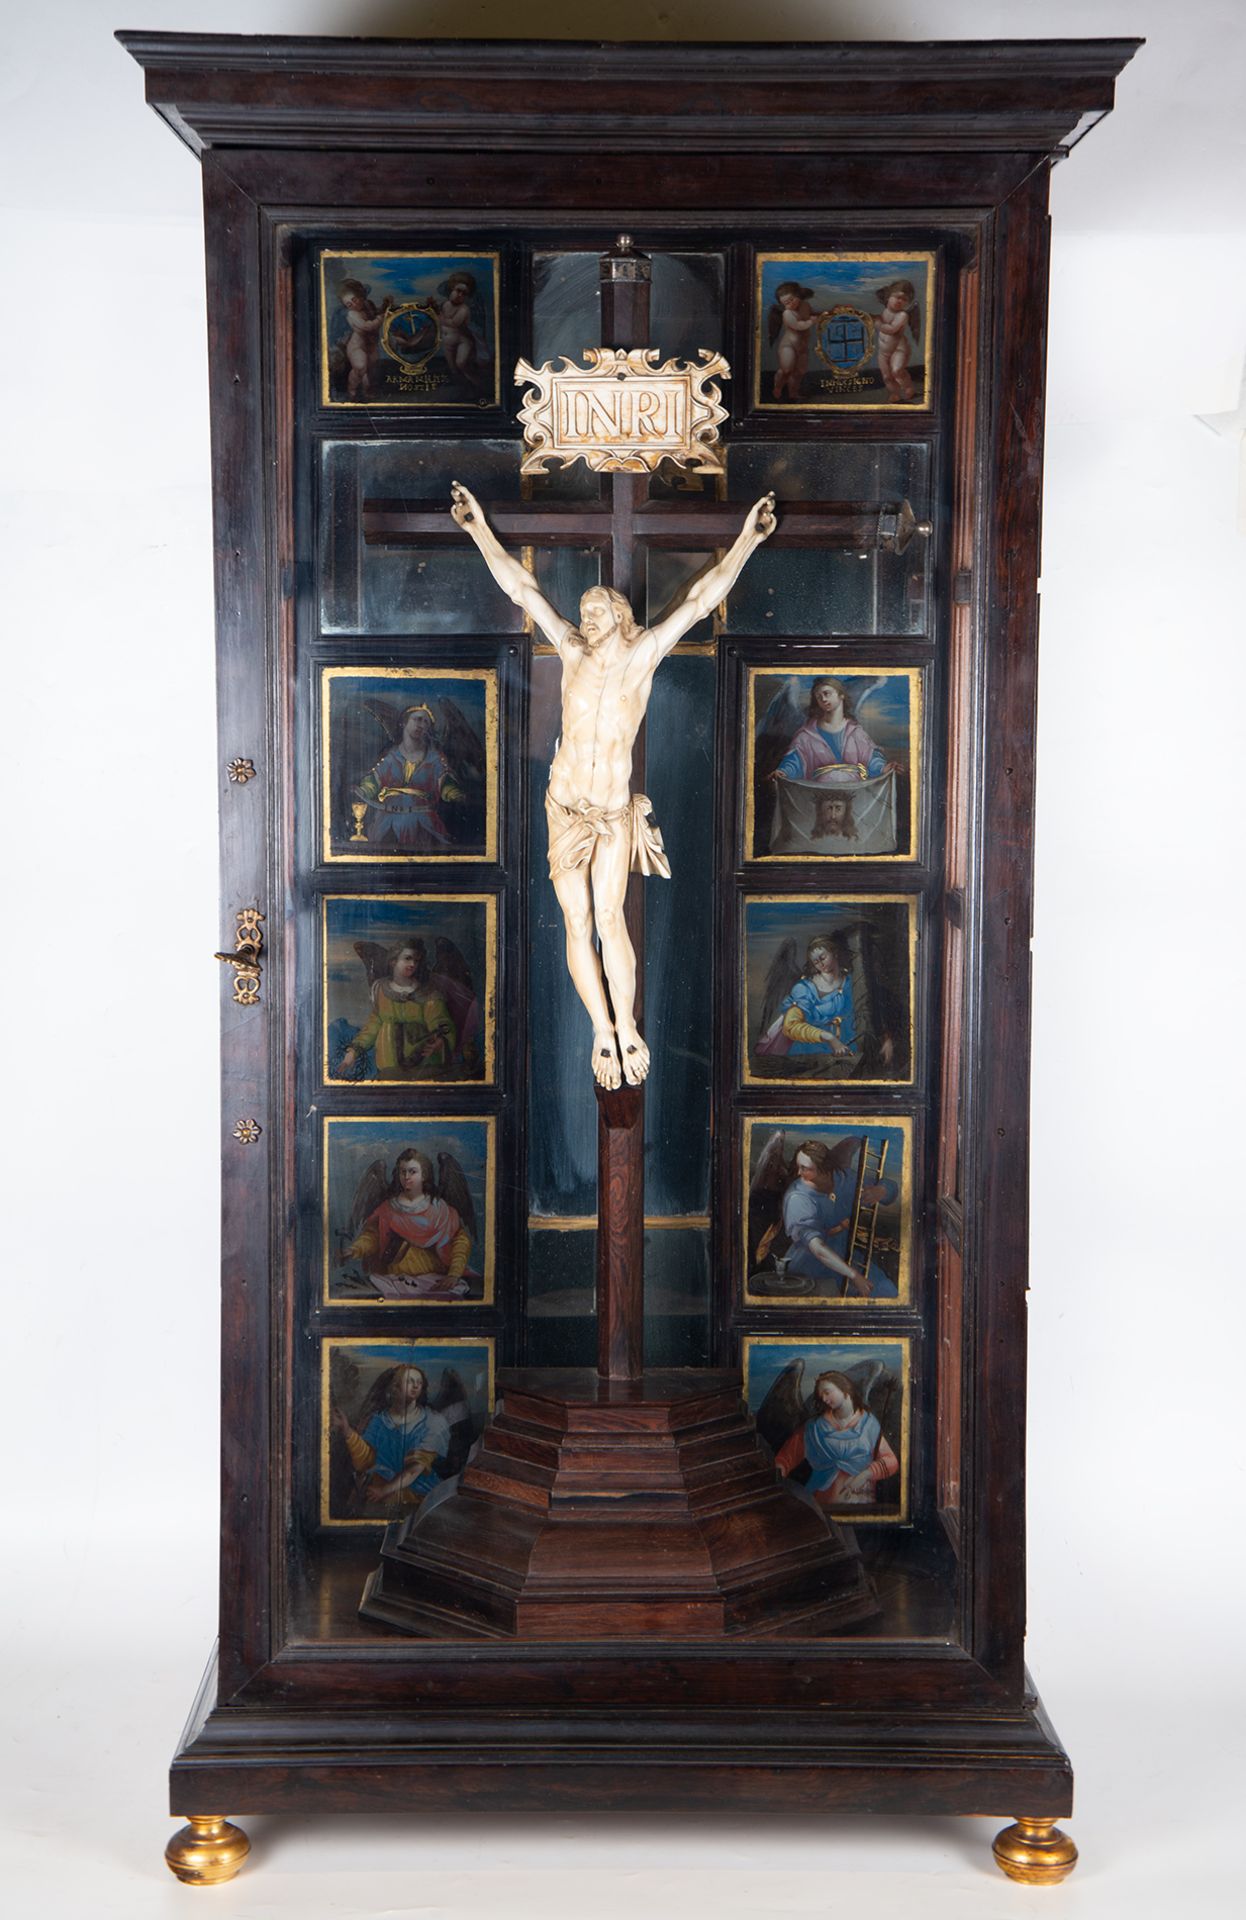 Large Neapolitan Christ in Painted Glass Niche, 17th - 18th centuries